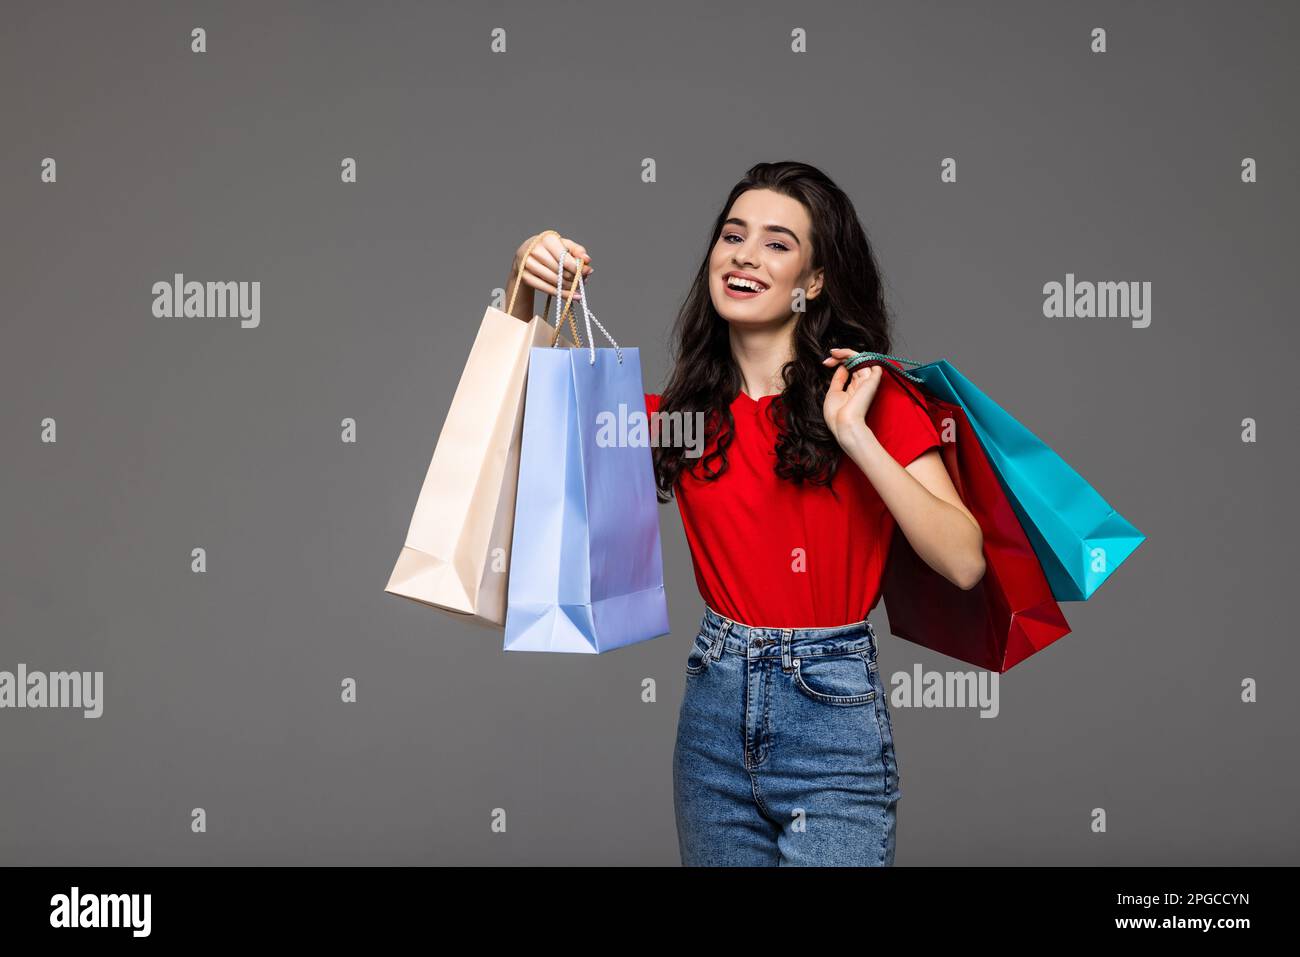 Photo of excited adorable woman with long curly hair smiling and carrying colorful shopping bags isolated over gray background Stock Photo